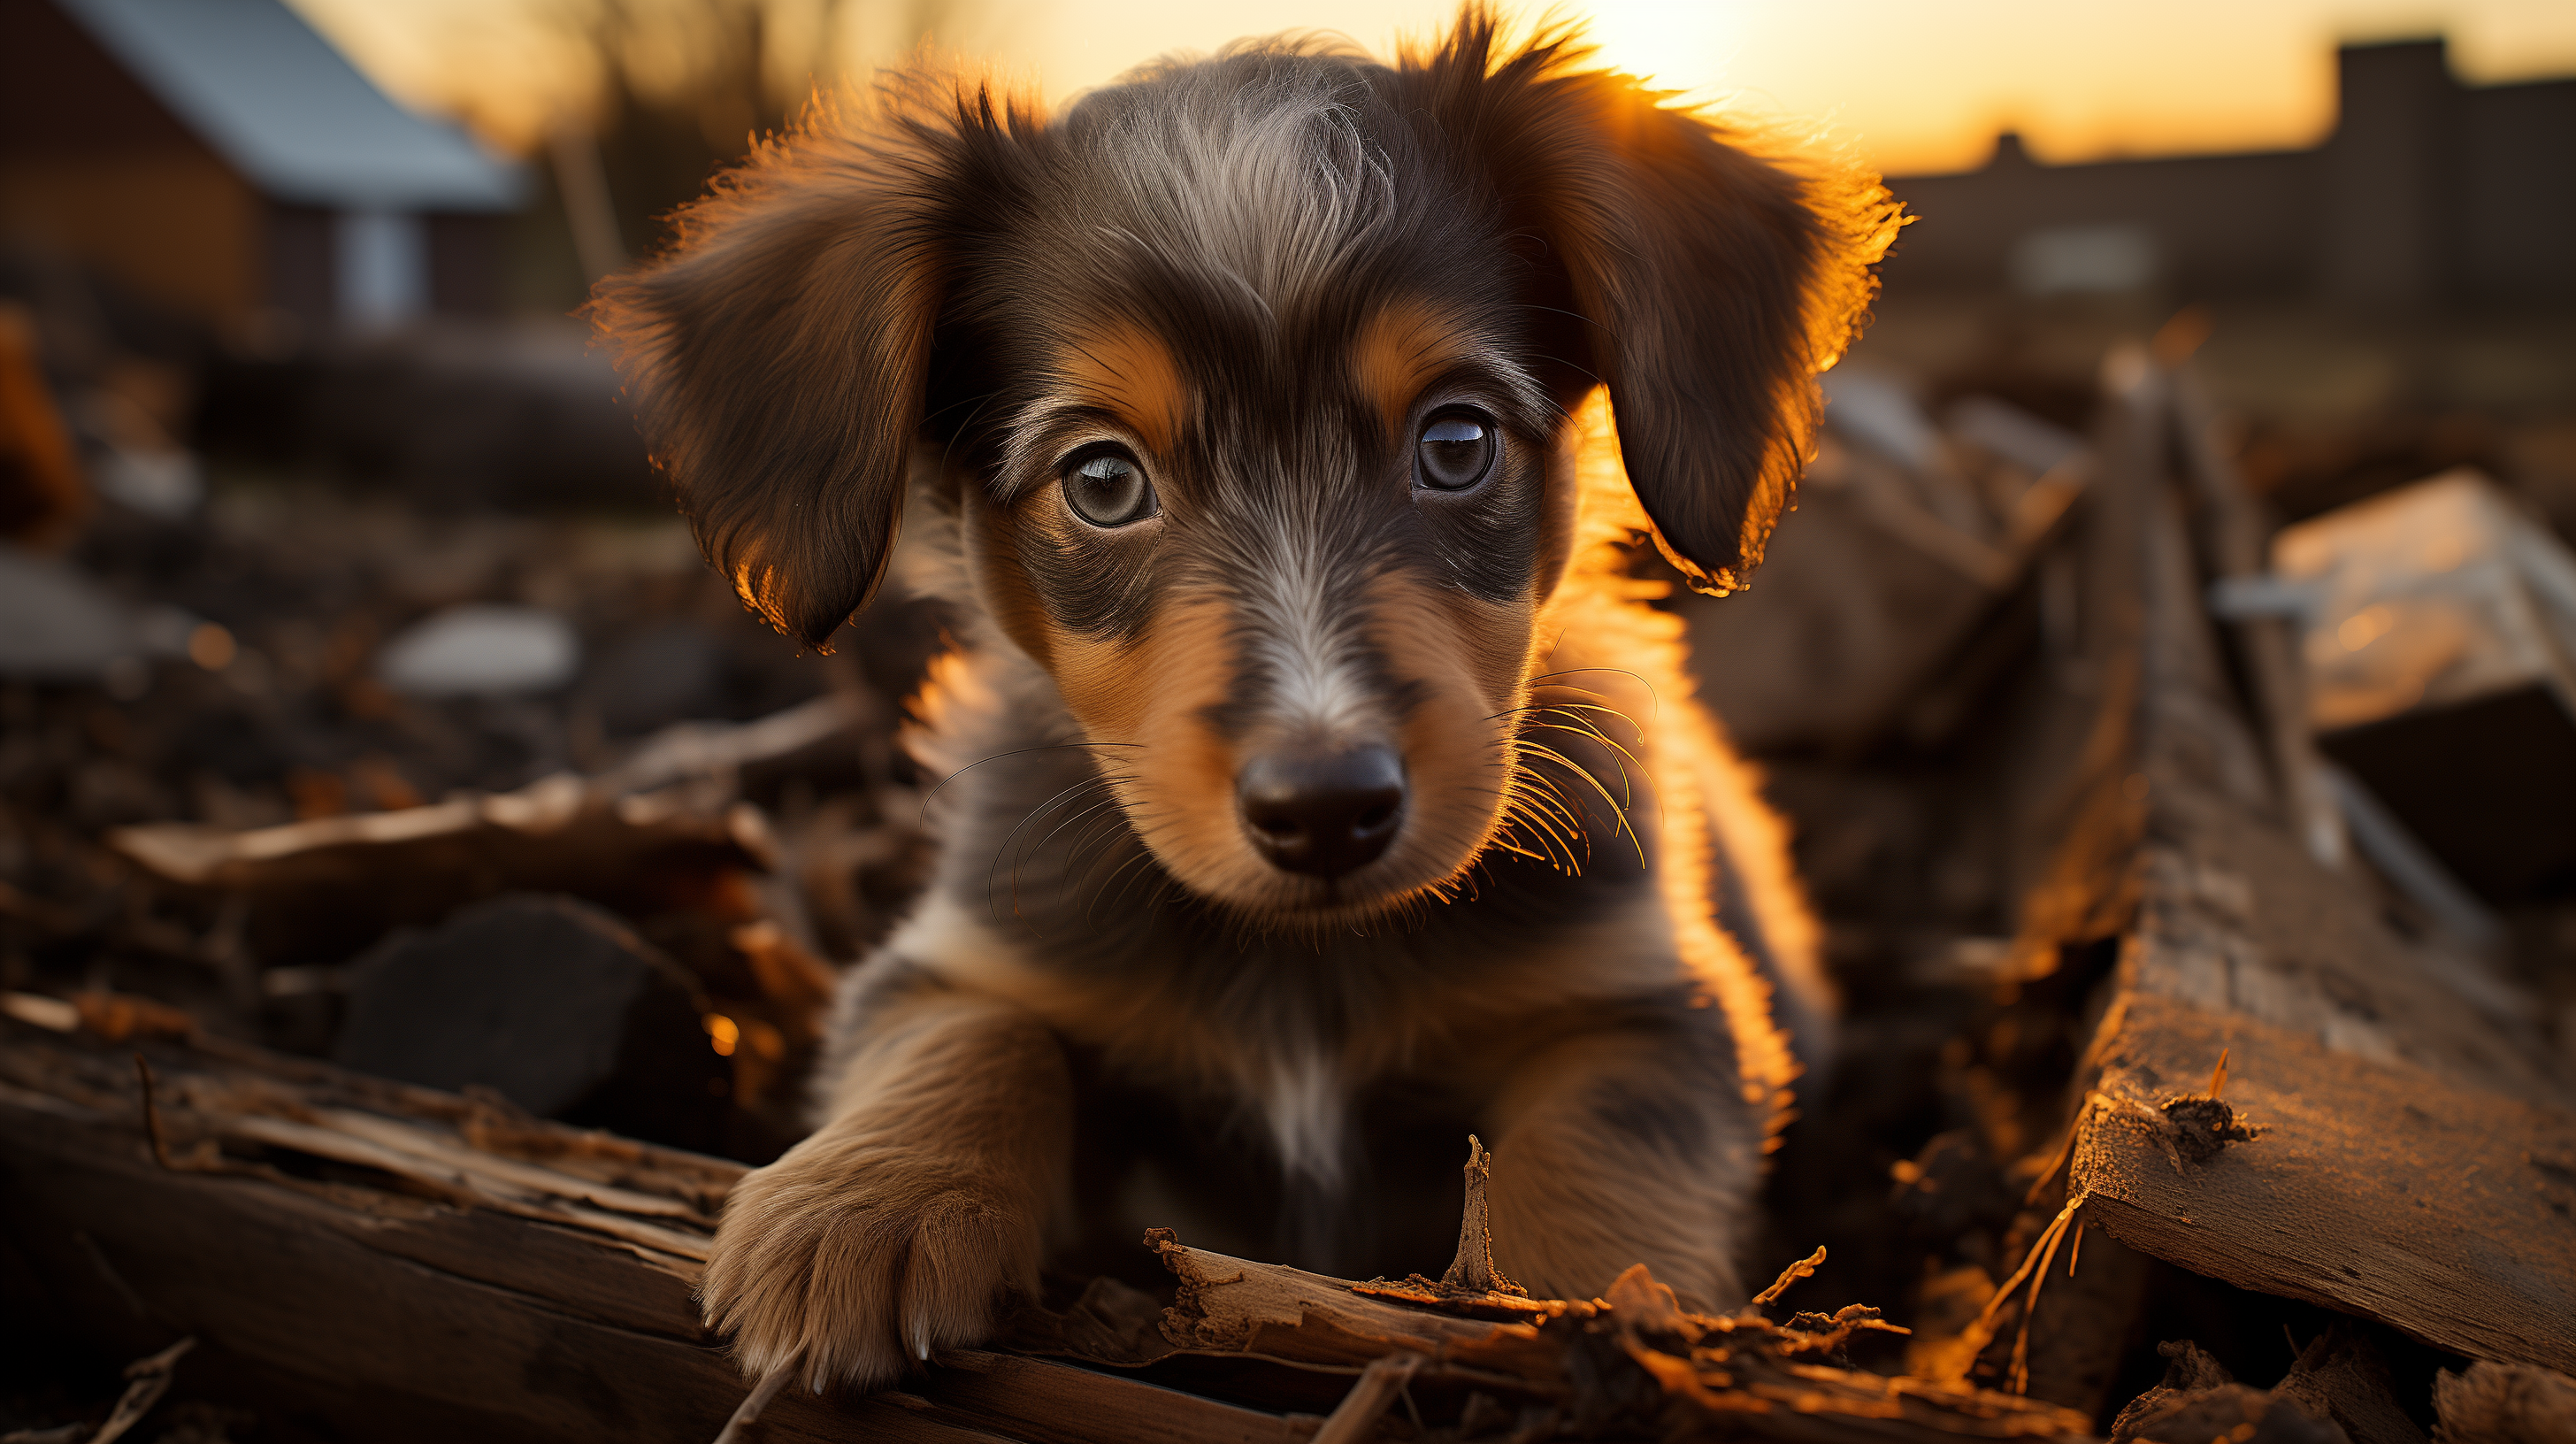 HD wallpaper of a cute Dachshund puppy with big expressive eyes lying amongst logs during golden sunset.